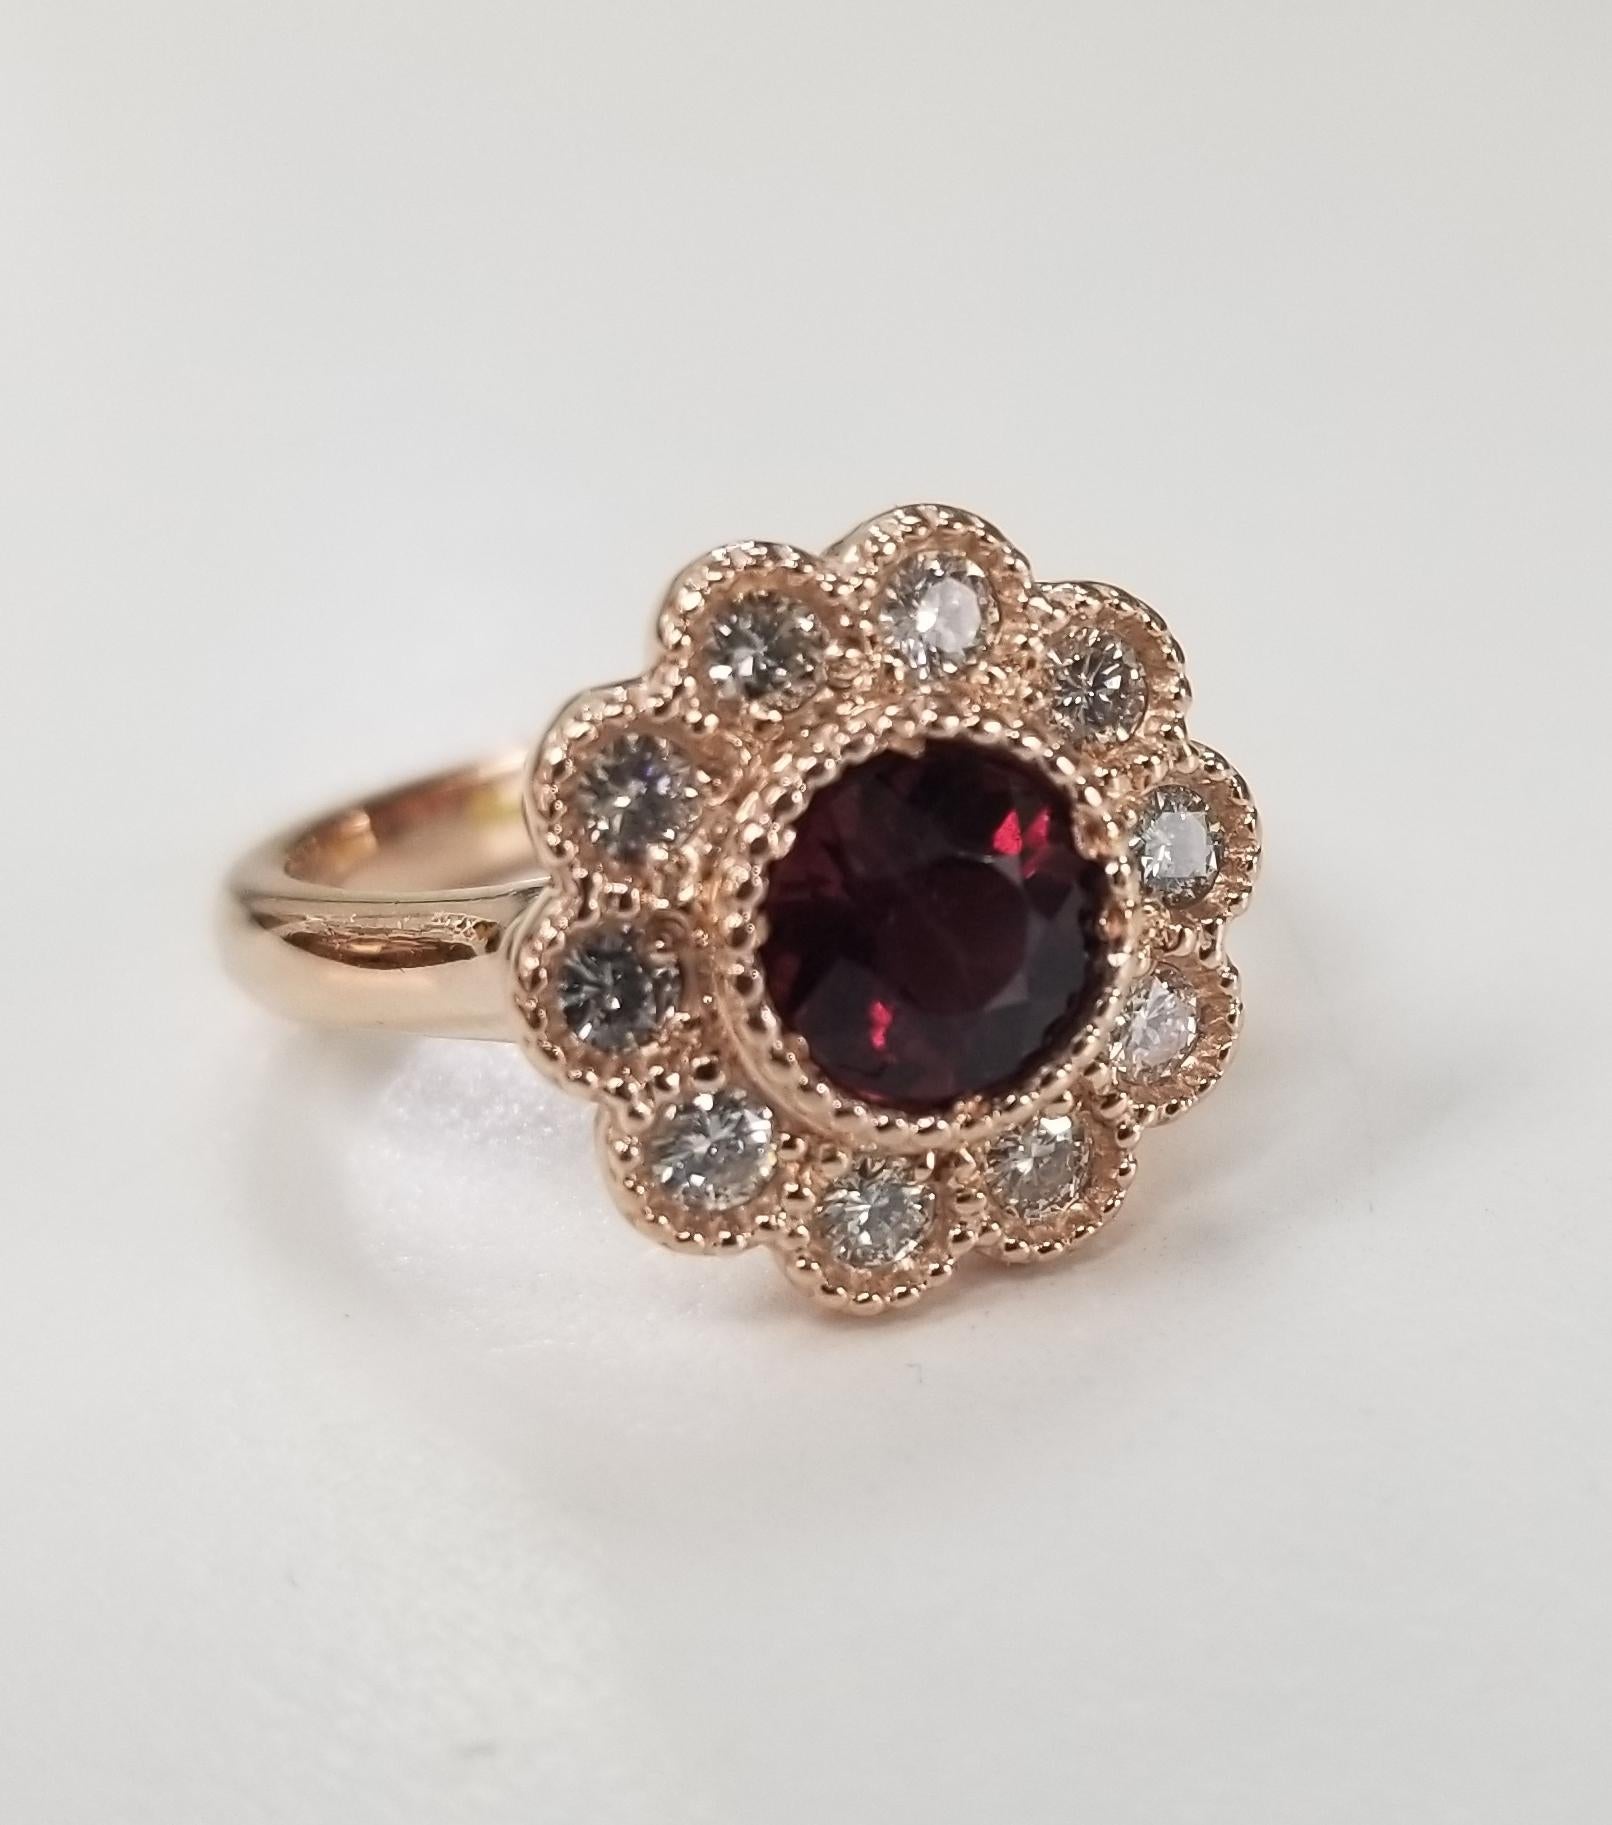 14k rose gold Rubelite Garnet and diamond halo beaded ring, containing 1 round Rubelite Garnet of gem quality weighing .88pts.  Surrounded by 10 round full cut diamonds; color 